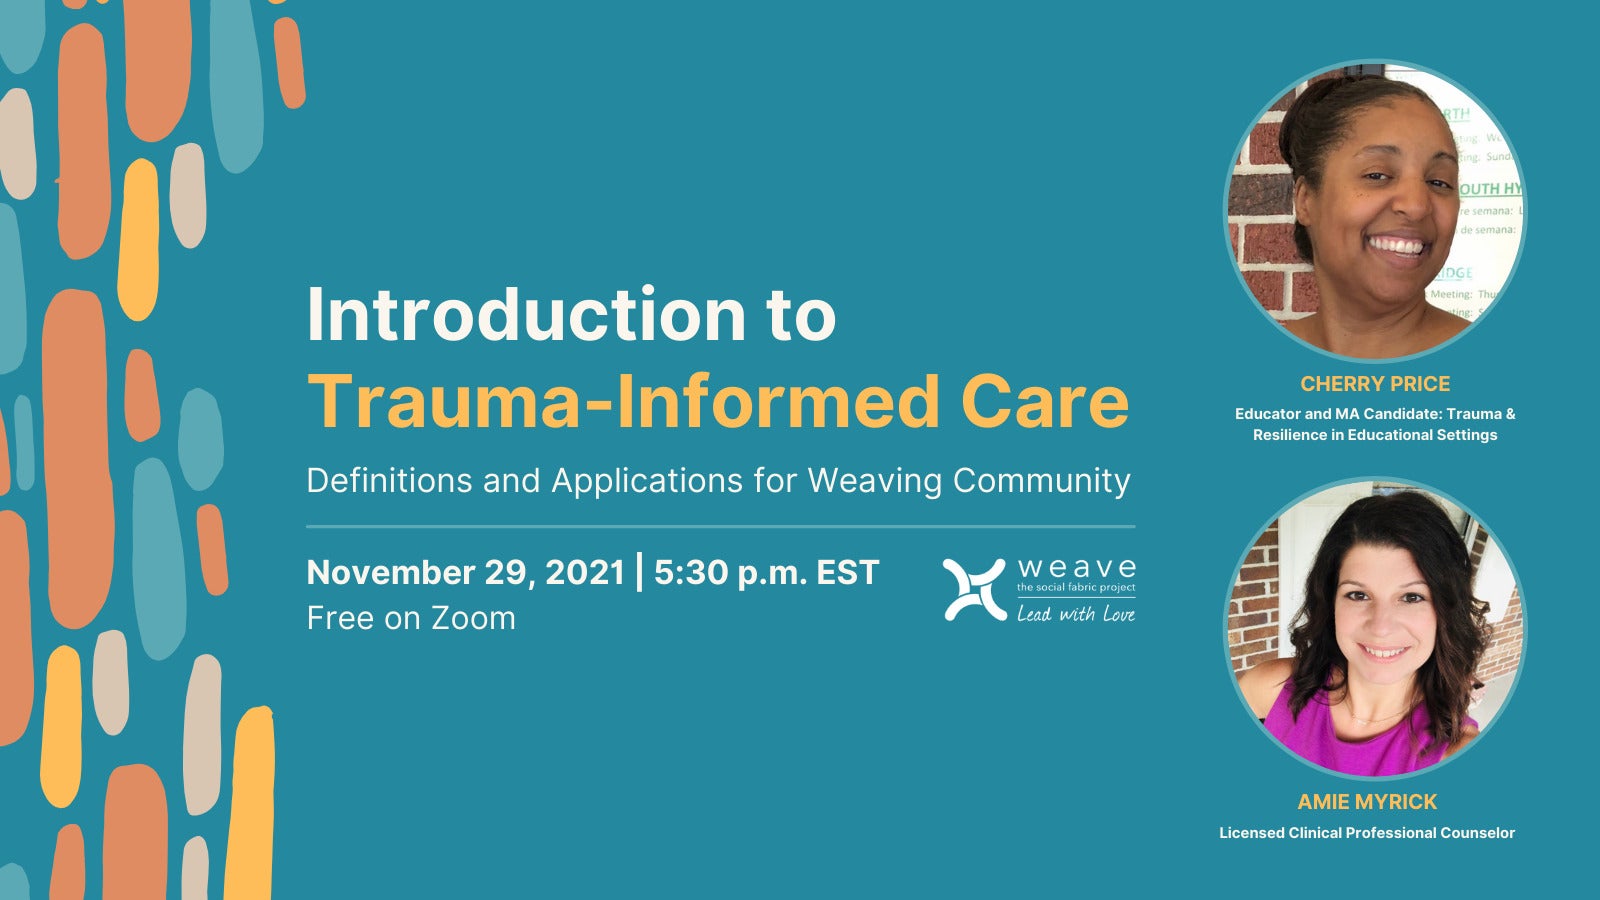 Introduction to Trauma-Informed Care: Definitions and Applications